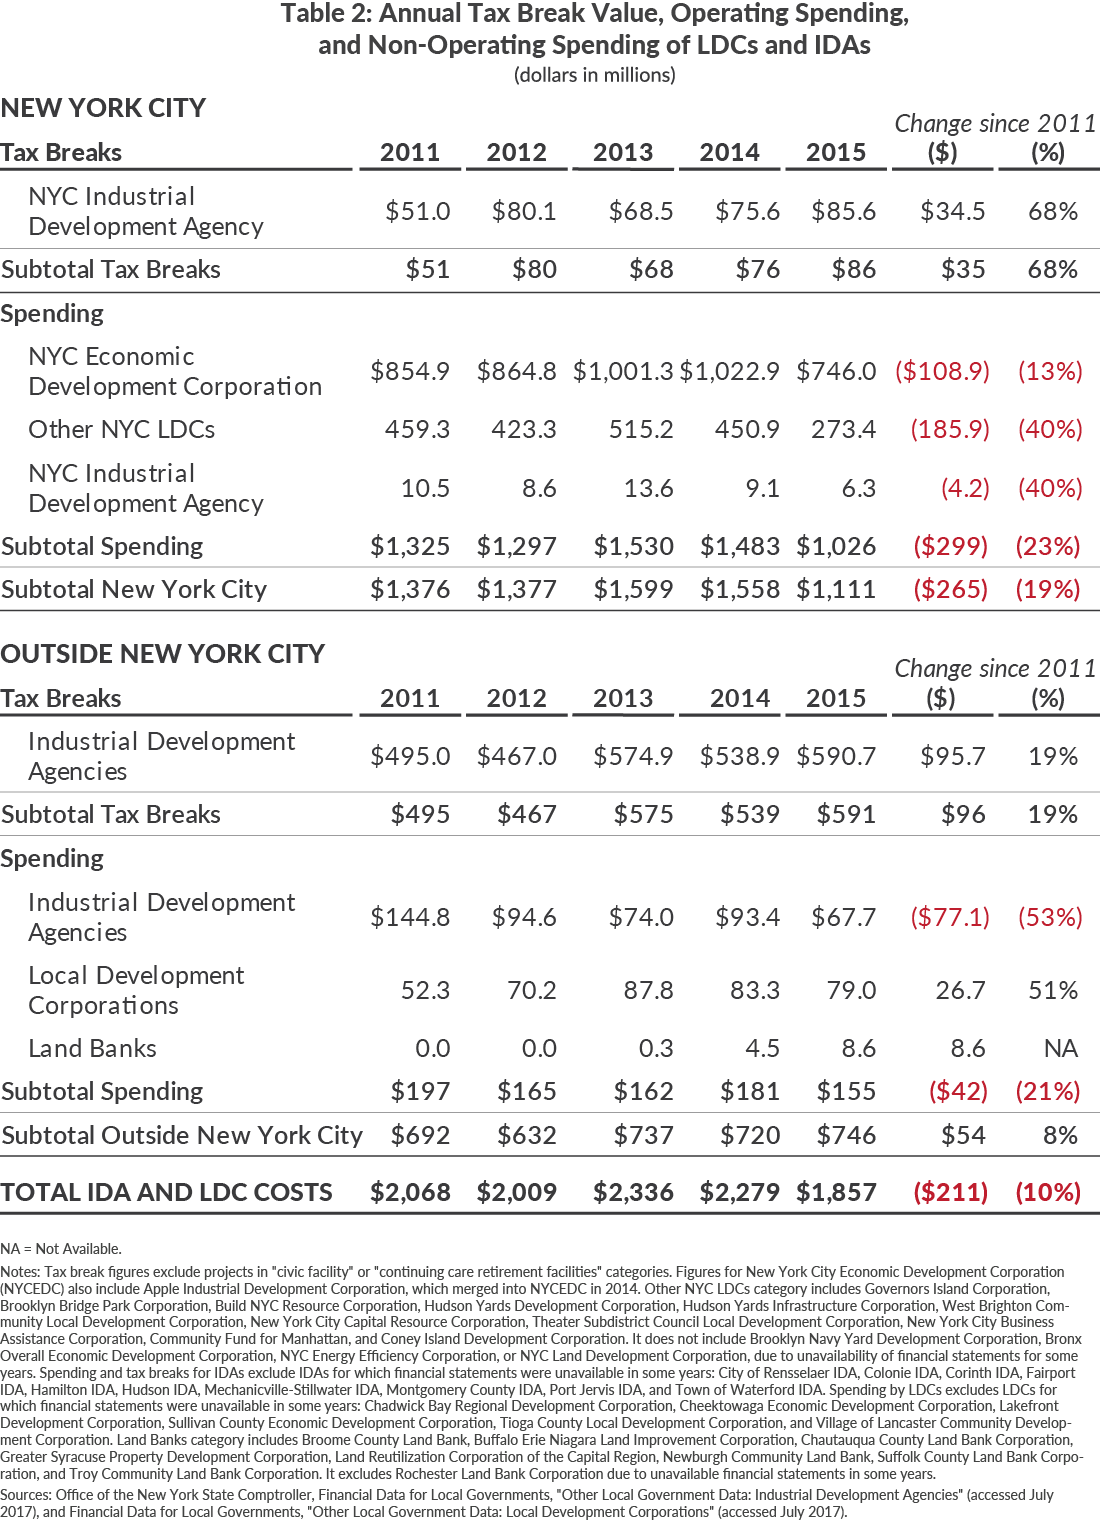 Table 2: Annual Tax Break Value, Operating Spending, and Non-Operating Spending of LDCs and IDAs